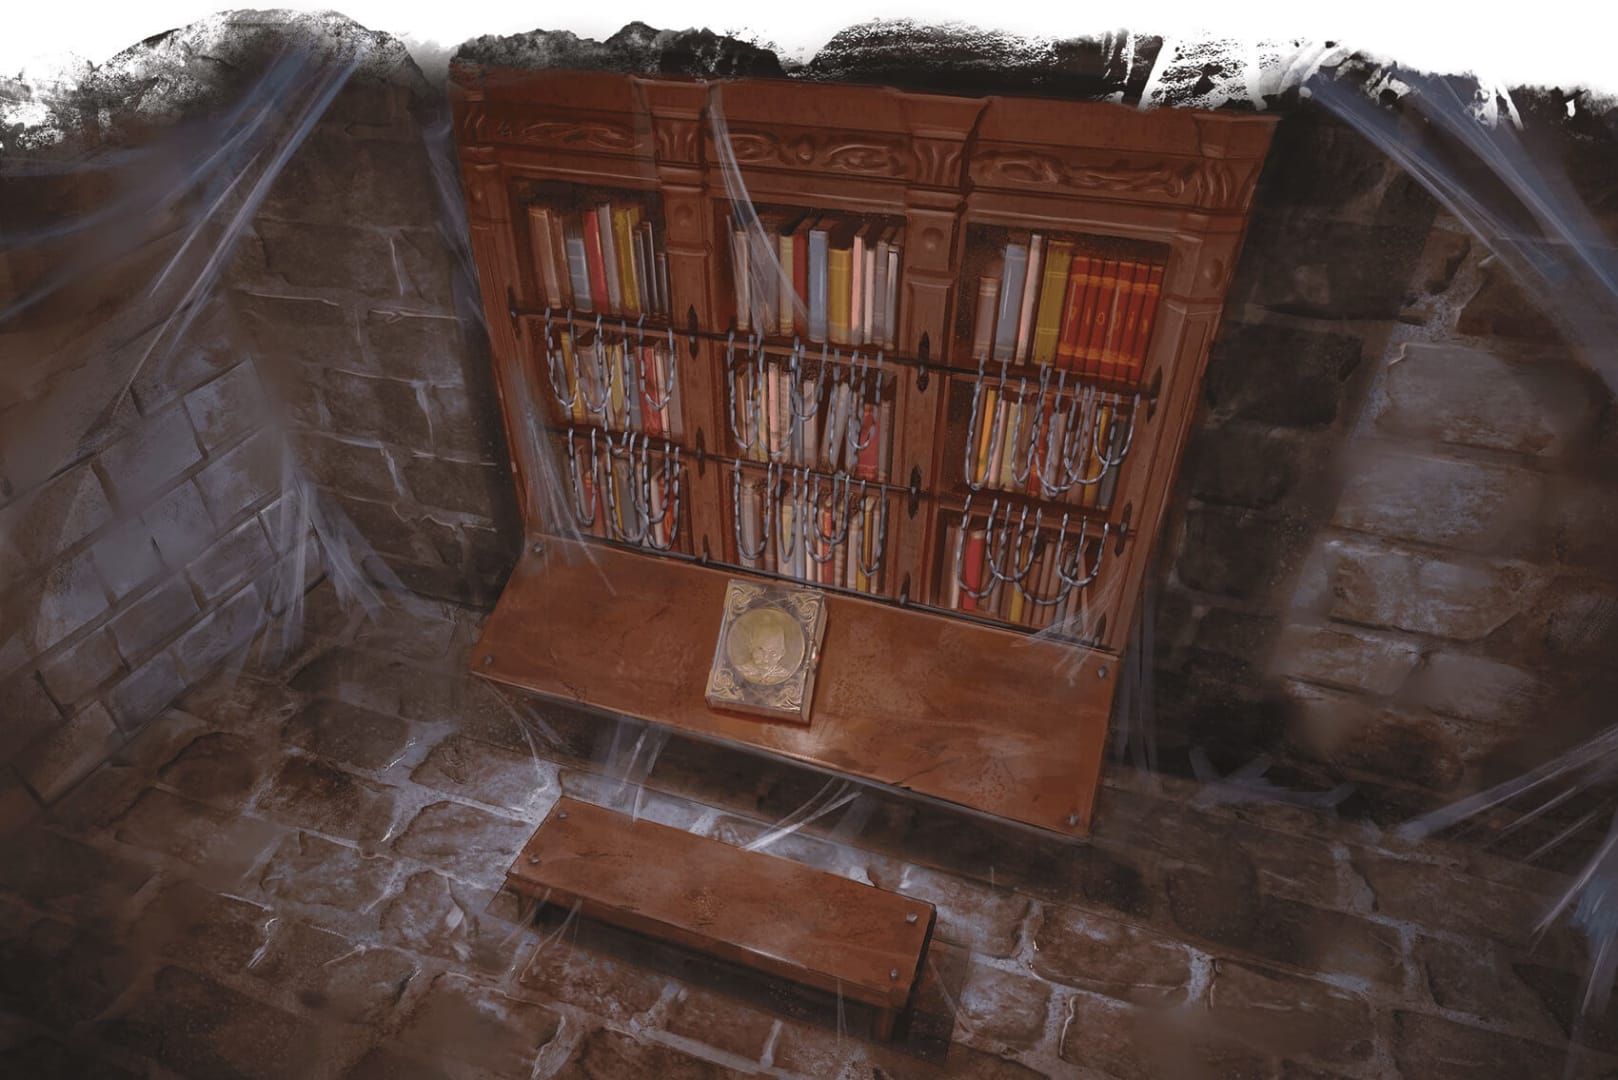 Chained library